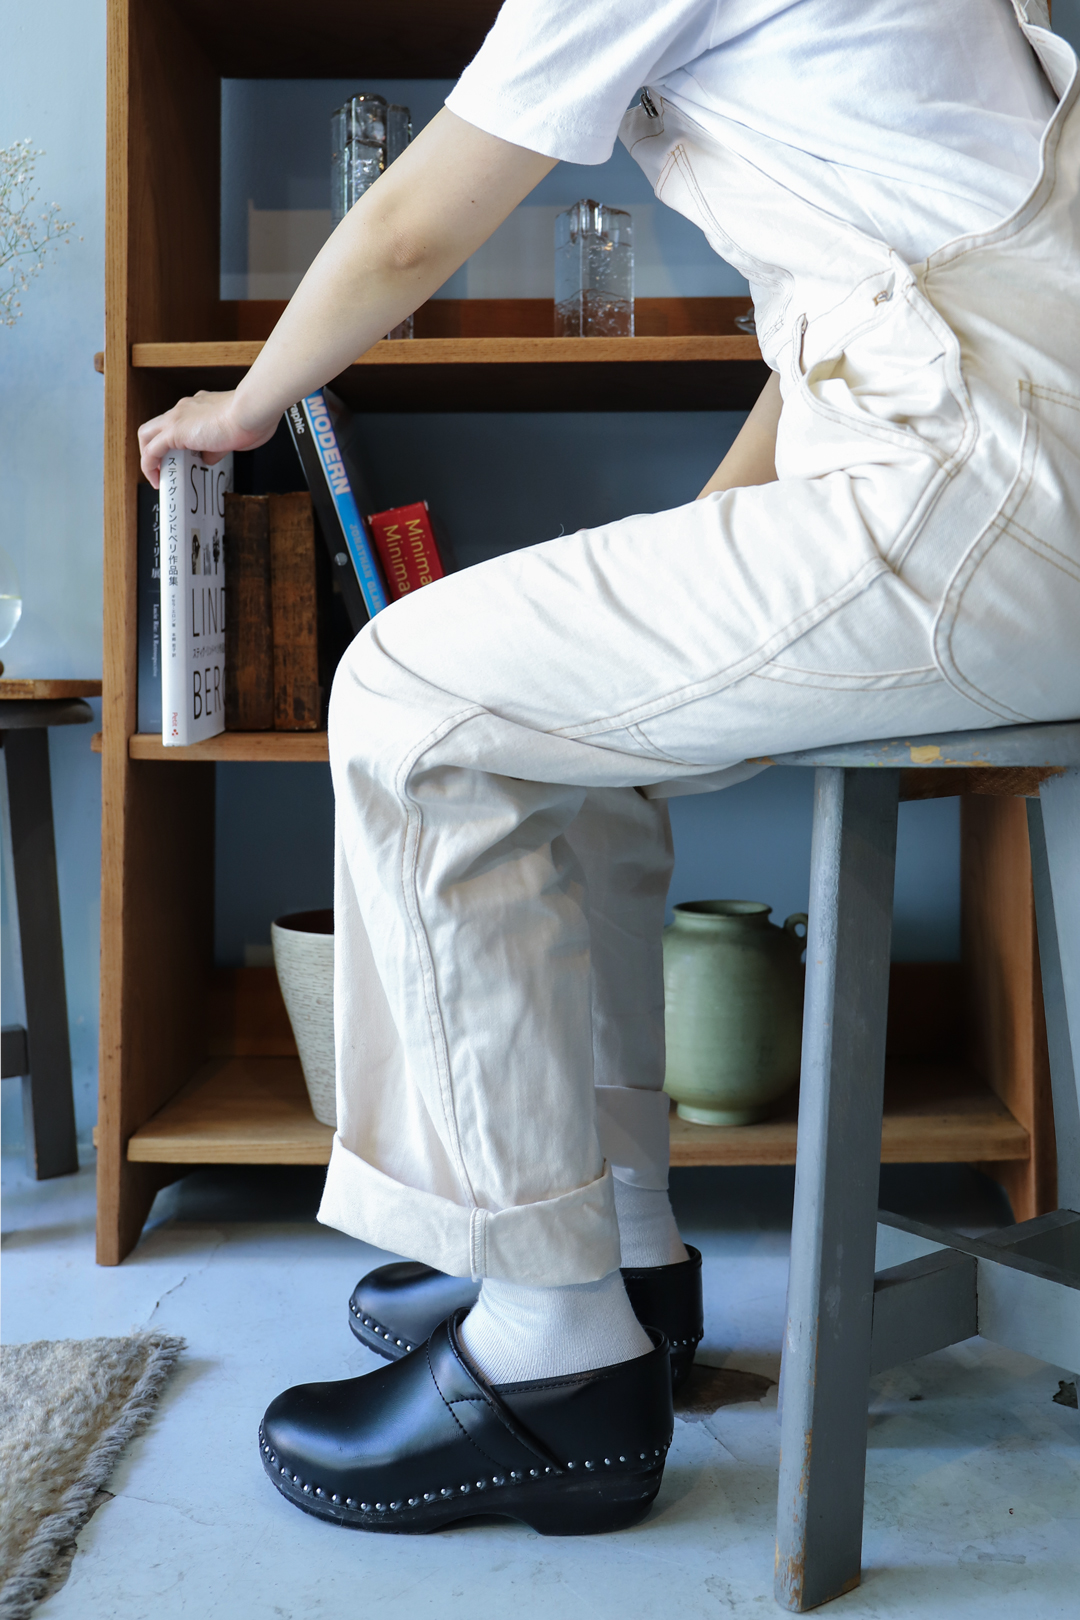 Vintage Atelier Stool Painted Gray/ヴィンテージ アトリエスツール 丸椅子 グレーペイント シャビーシック